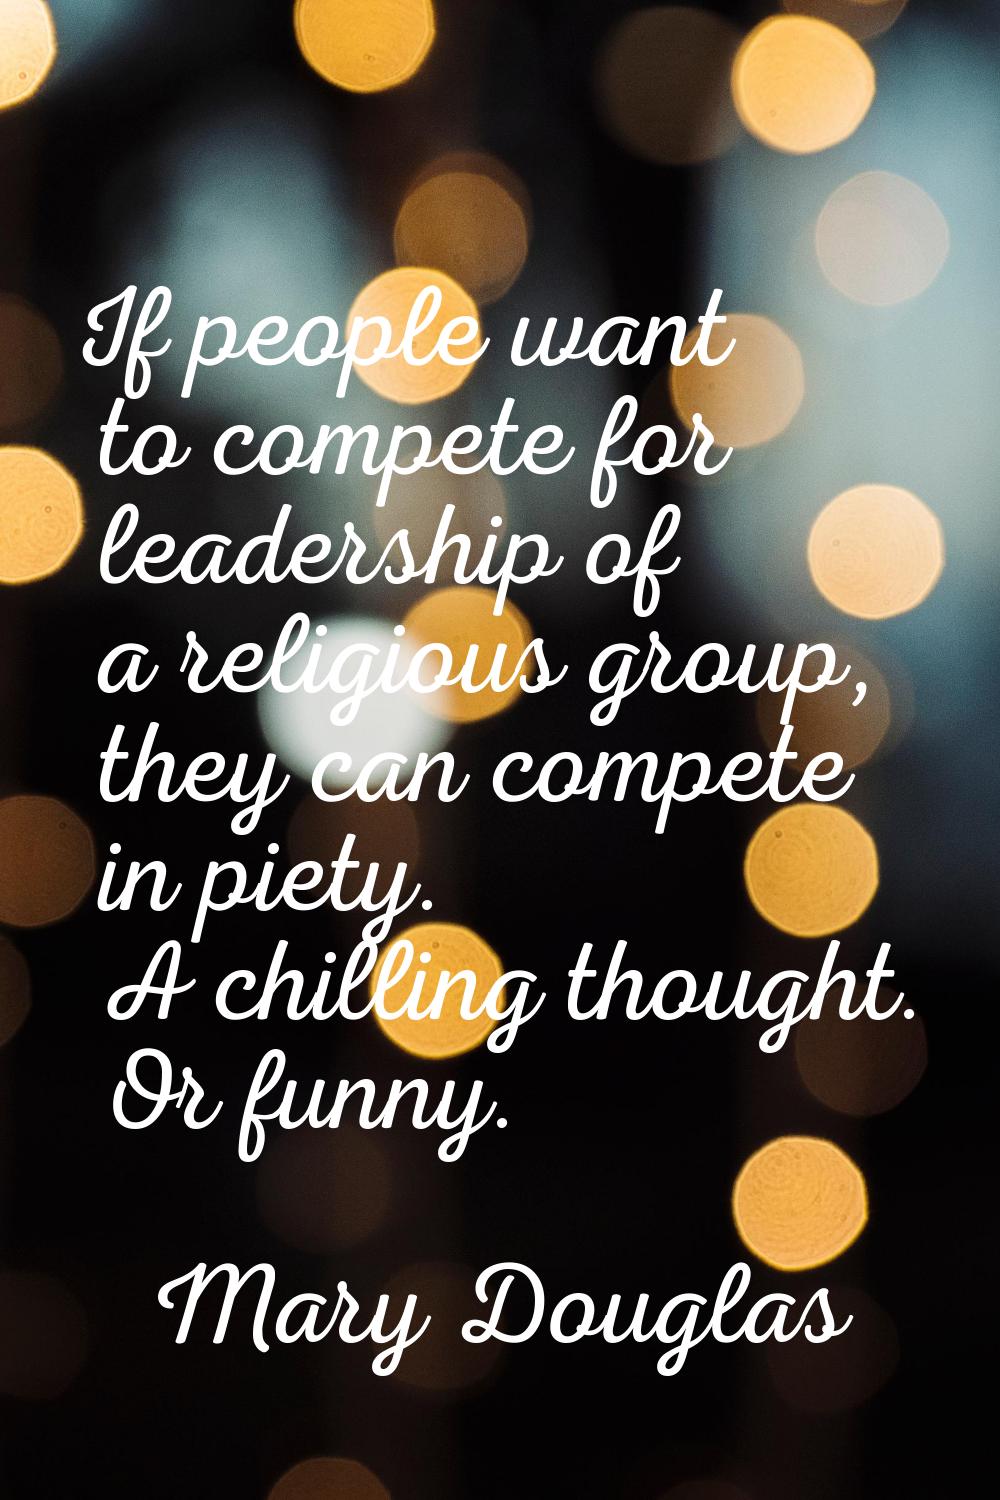 If people want to compete for leadership of a religious group, they can compete in piety. A chillin